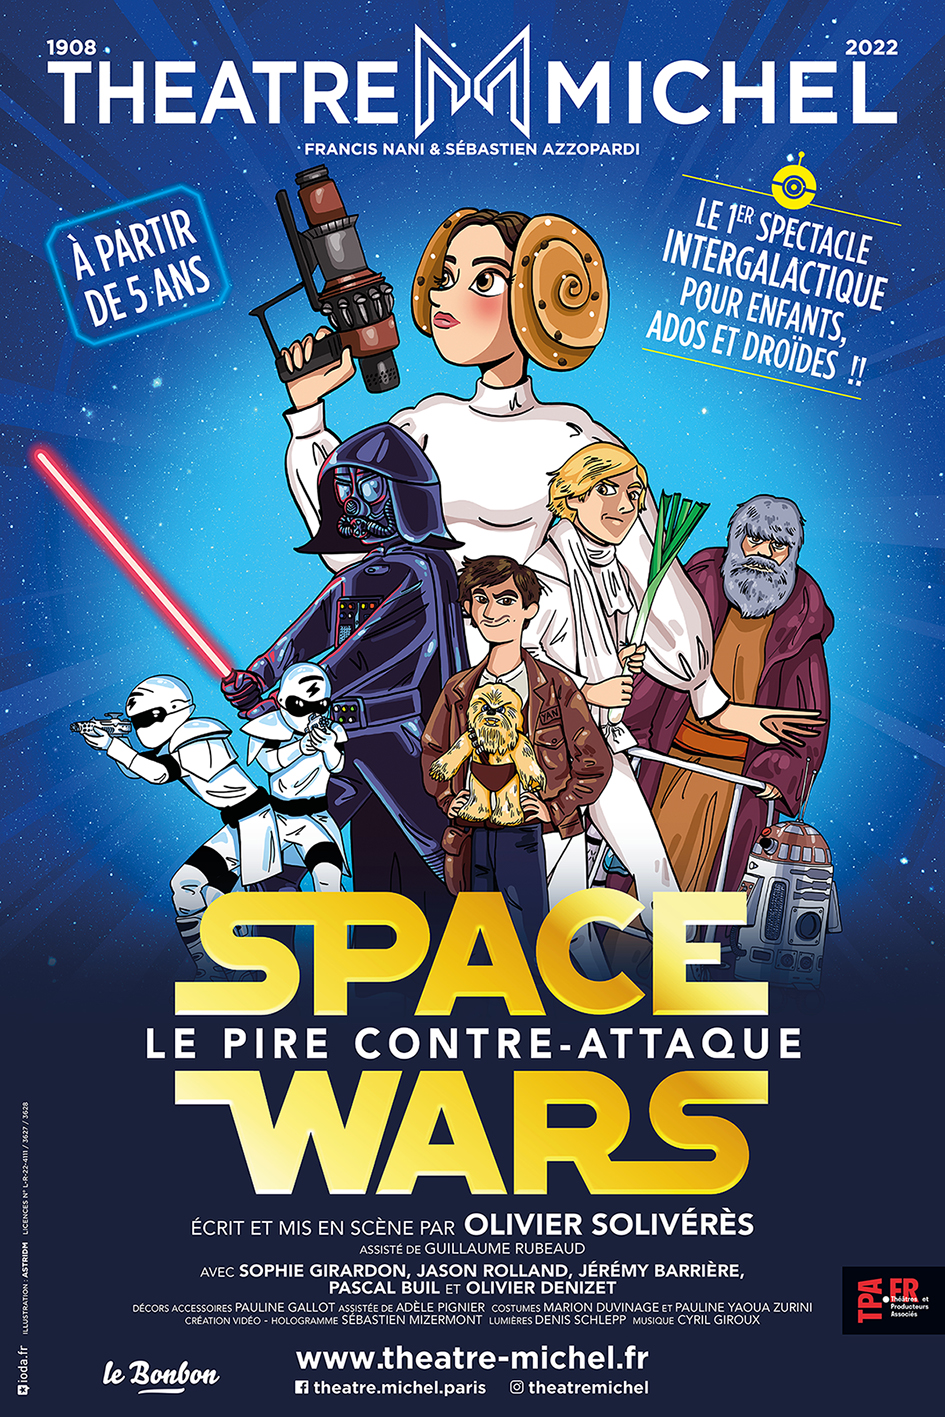 Spectacle Space Wars